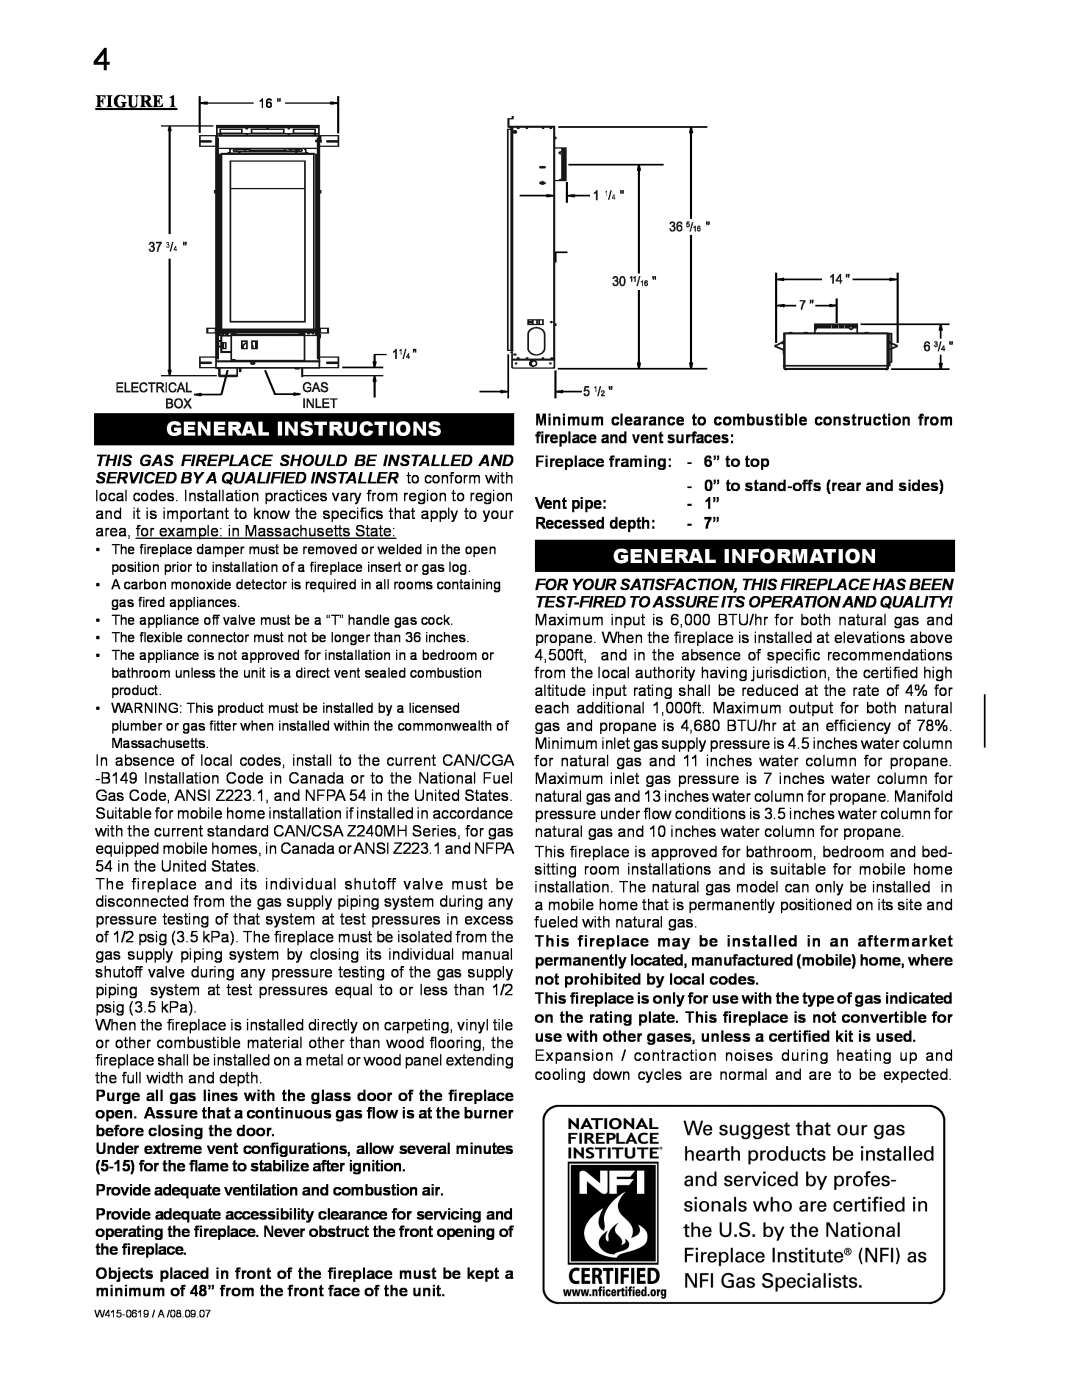 Napoleon Fireplaces GT8P, GT8N manual General Instructions, General Information 